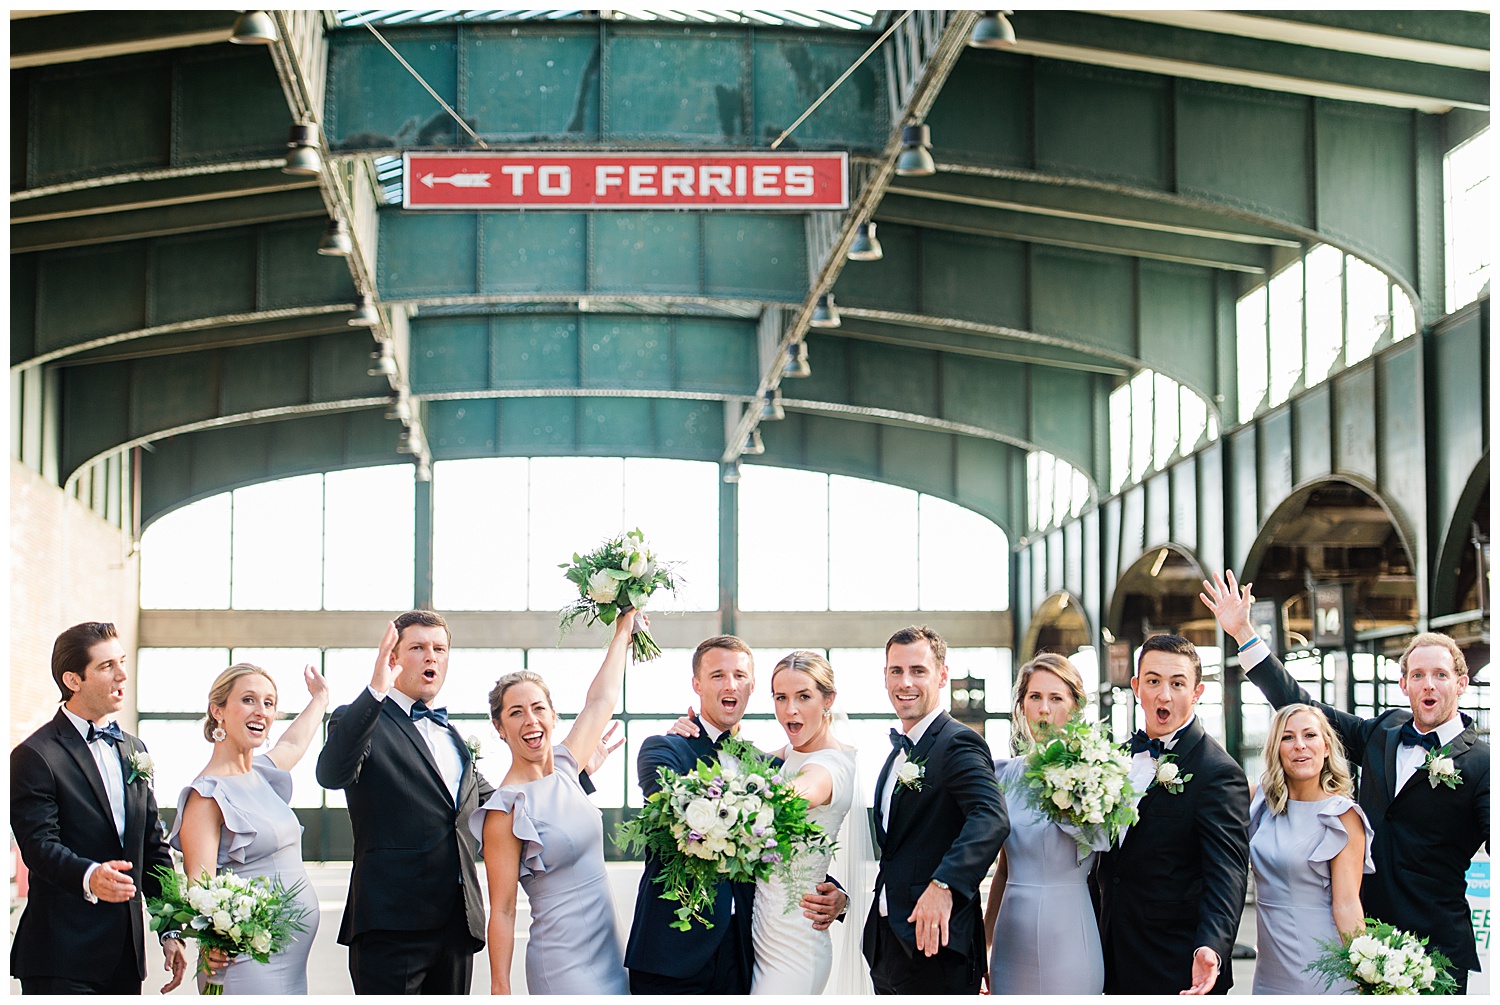 wedding party picture in vintage railroad terminal